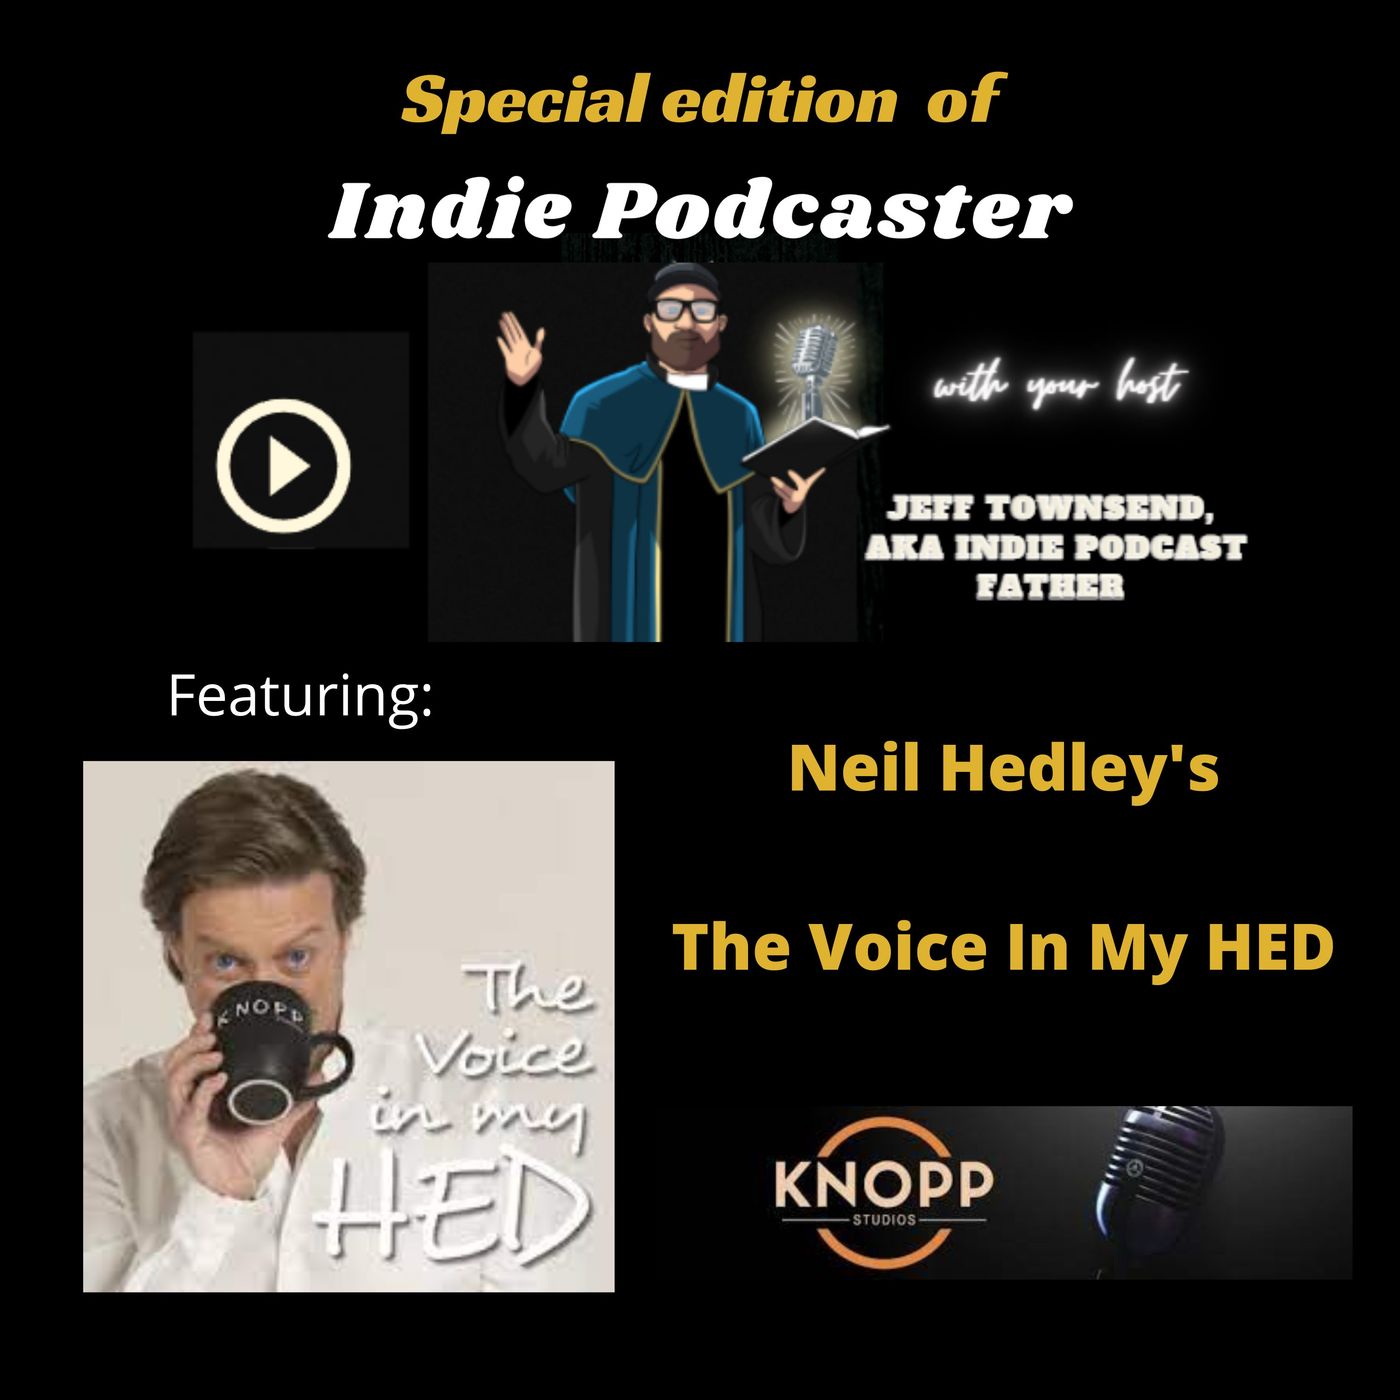 Neil Hedley's The Voice In My HED